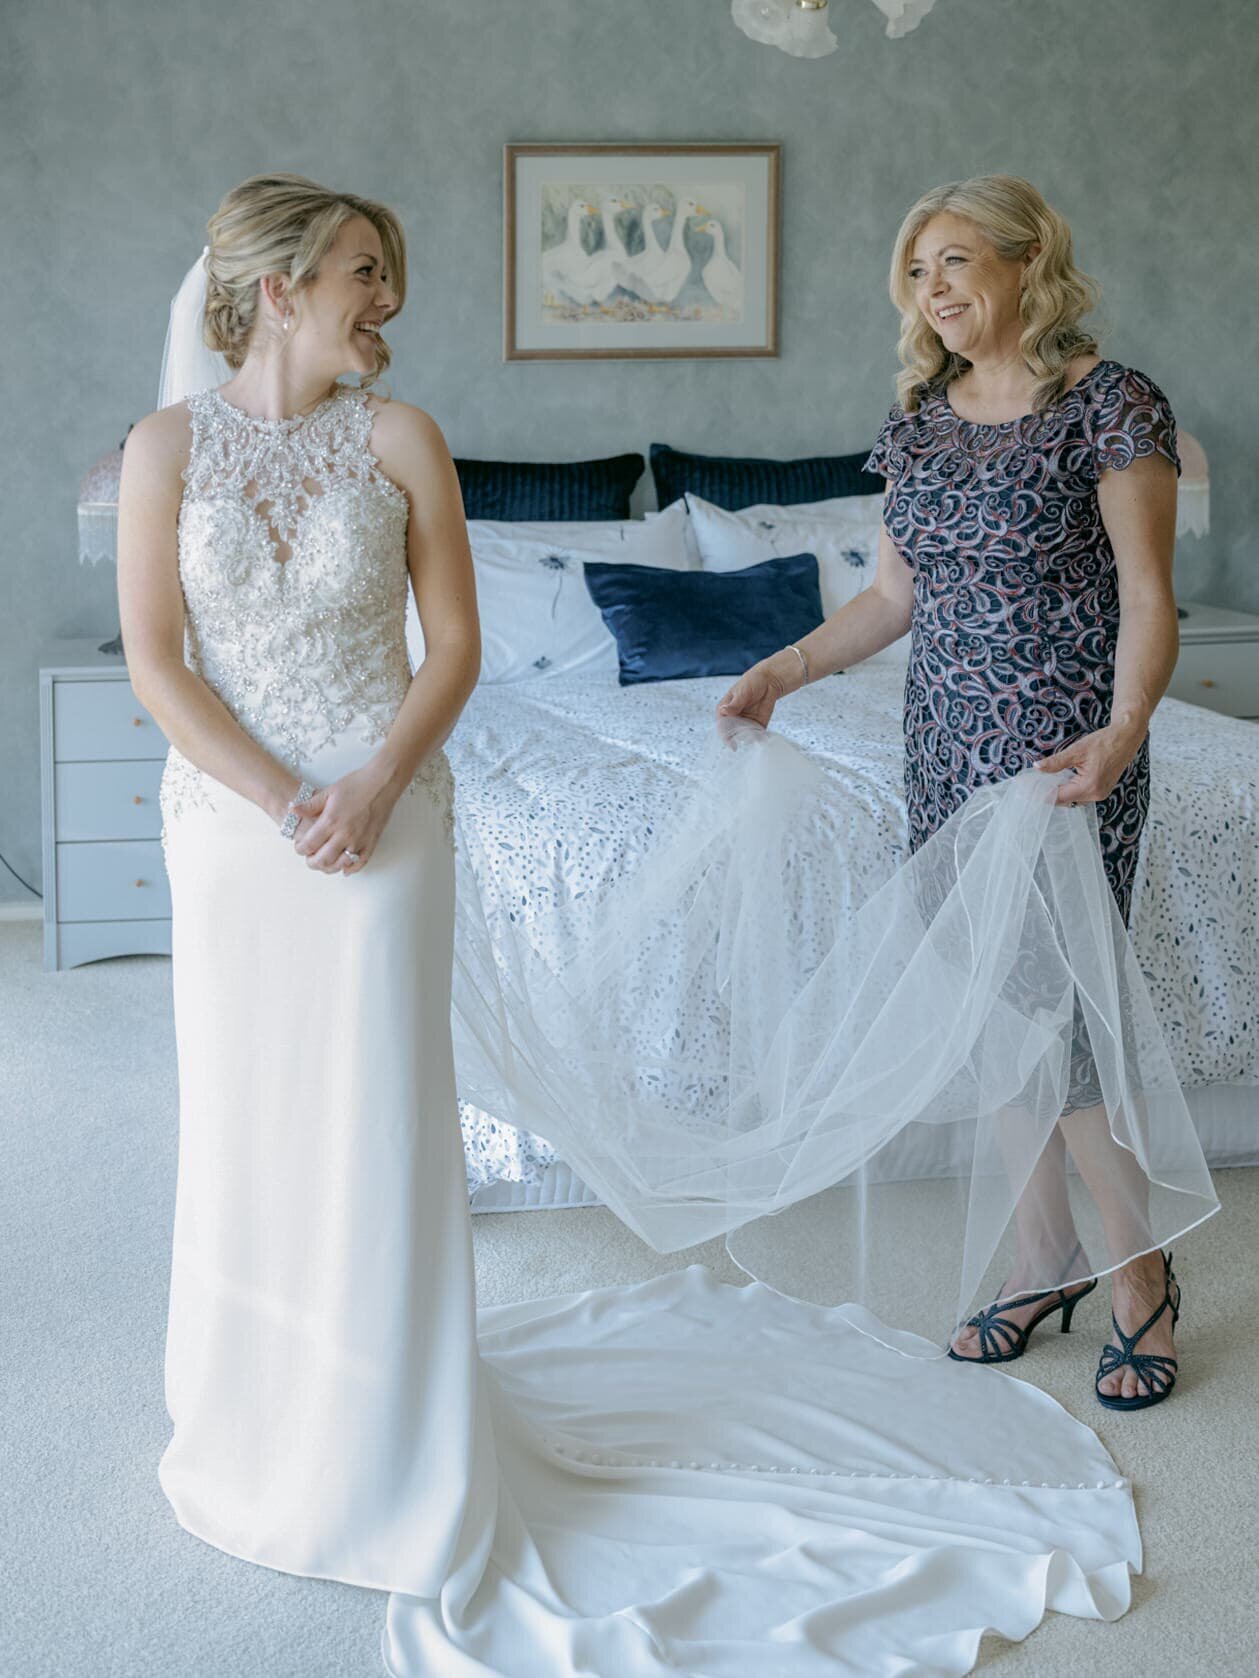 Stones of the Yarra Valley wedding - Serenity Photography 39